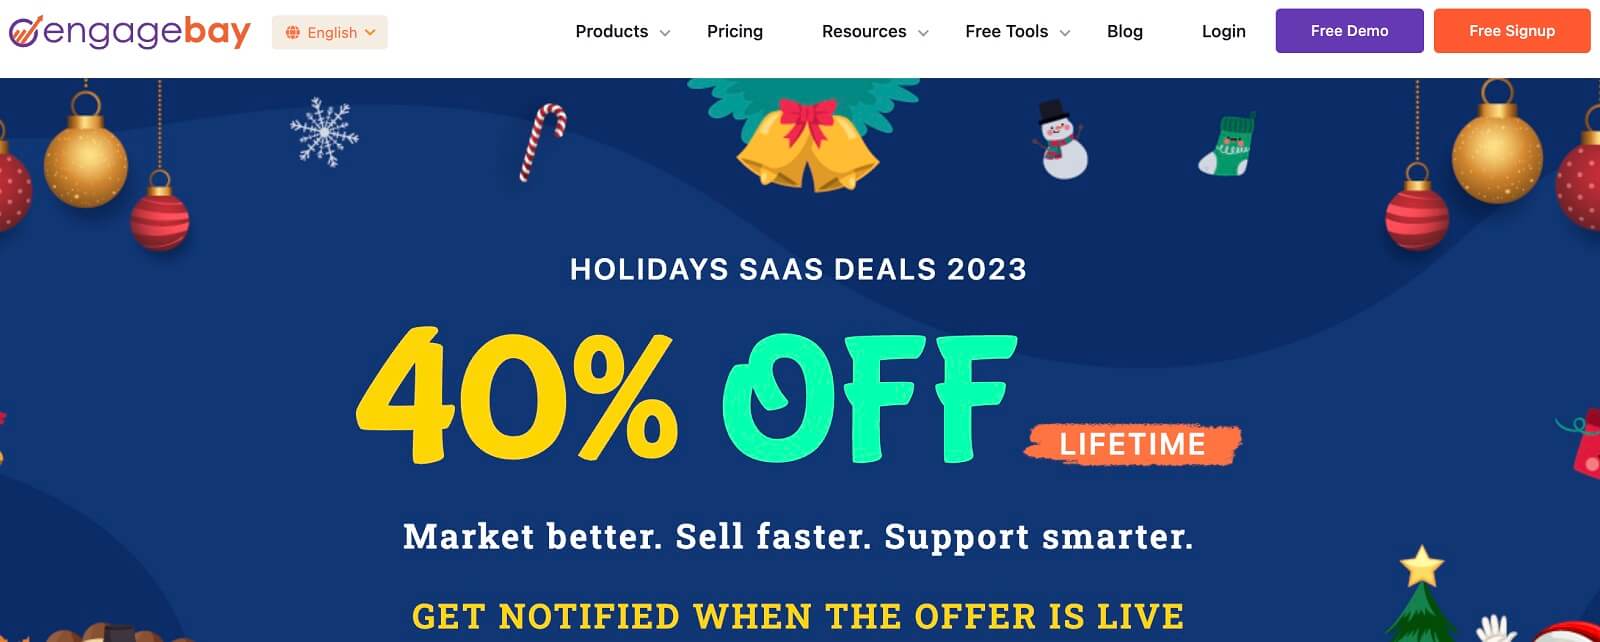 Passion for Savings is a website that features coupons and online deals and shares money-saving tips. For last year’s Black Friday campaign, the company featured a hero image showing that the sales season is officially here. Intending to lead people to check out the Black Friday deals, a CTA button takes them directly to the main page of interest. Right below the main hero section, you can see a section divider, a clear headline that directs site visitors to two other pages – Best Black Friday Deals and Black Friday Alerts. It does so without disturbing the flow of the copy or impeding other key elements on the page. The Black Friday Alerts are used as a great lead magnet for those who want to opt-in to stay up to date with upcoming deals. It’s also effective because it doesn’t ask people for many details – just their first name and email address. Overall, this landing page is clean and has lots of white space that gives it a proper structure.